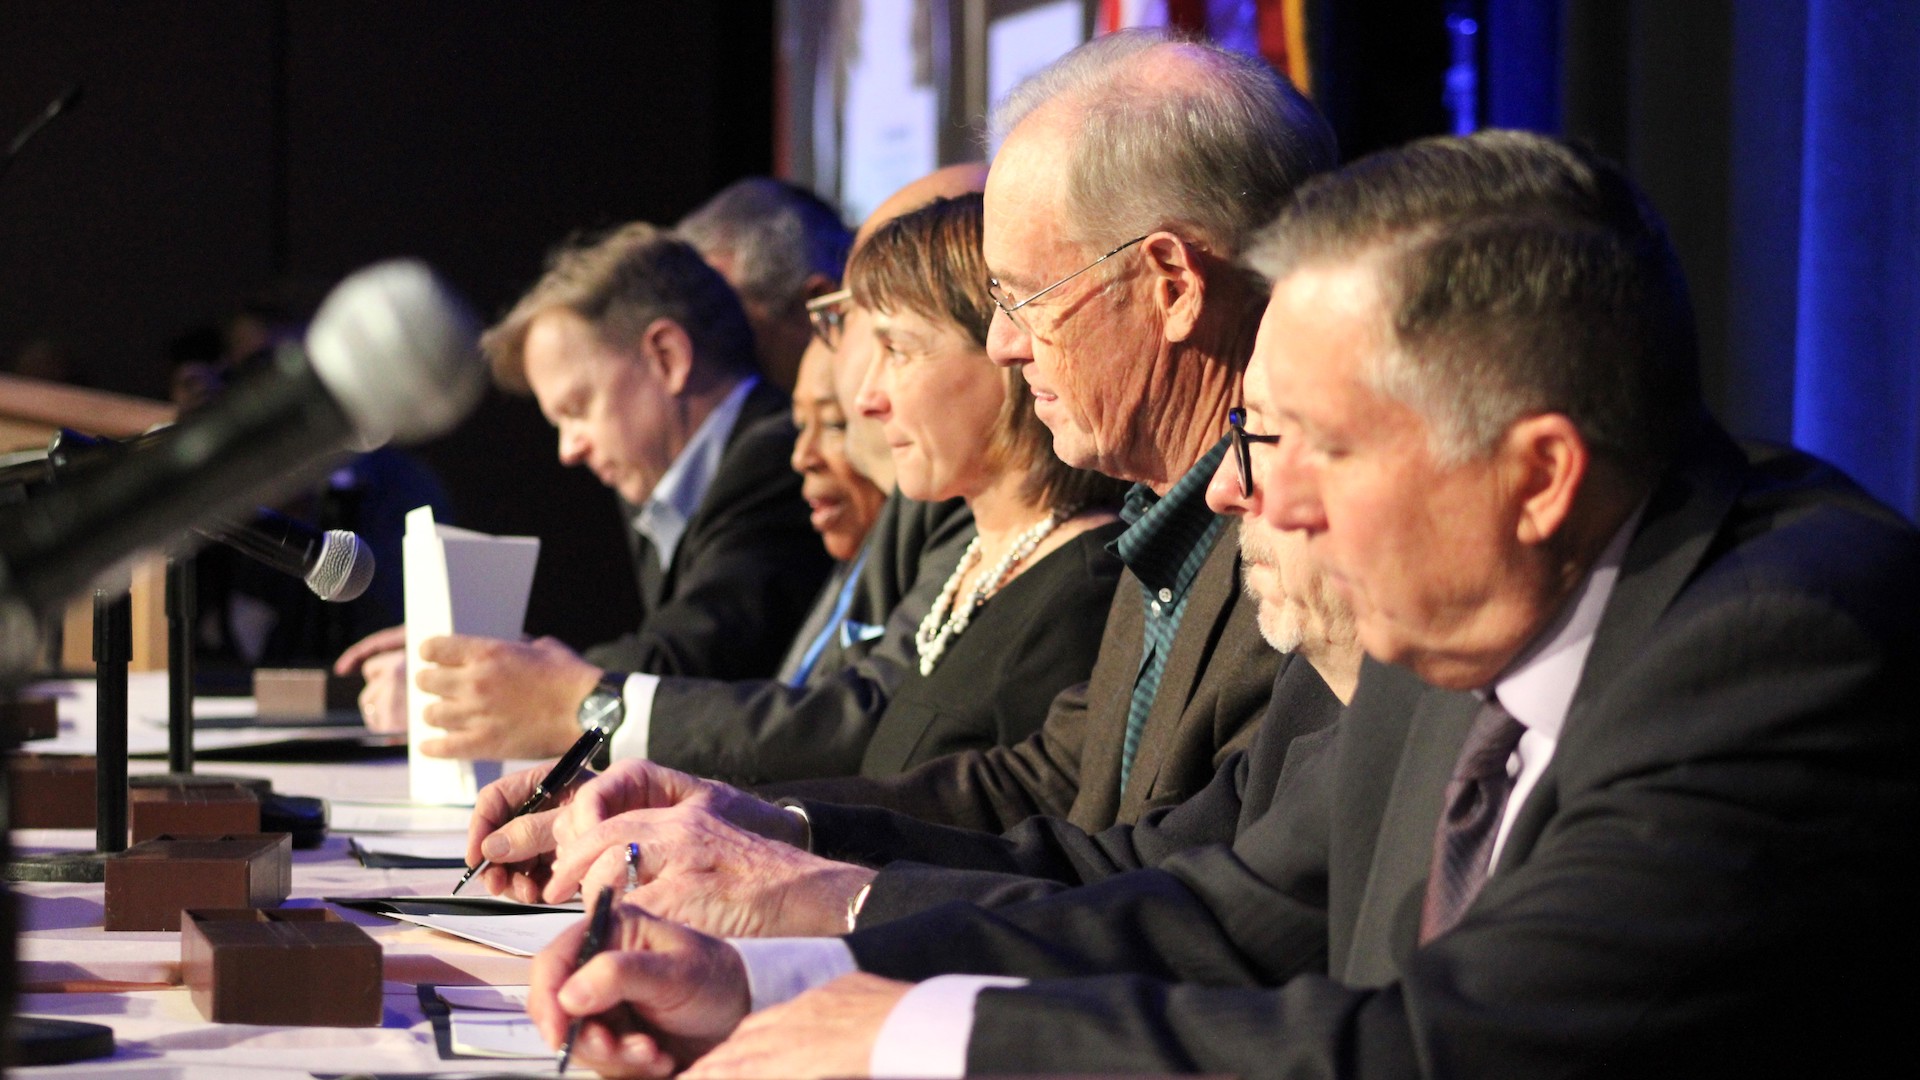 Representatives from lower Colorado River basin states, the federal government and tribes sign the new 500+ plan. The deal, formalized at the Colorado River Water Users Association conference in Las Vegas, allocates millions of dollars to help put water back into Lake Mead.